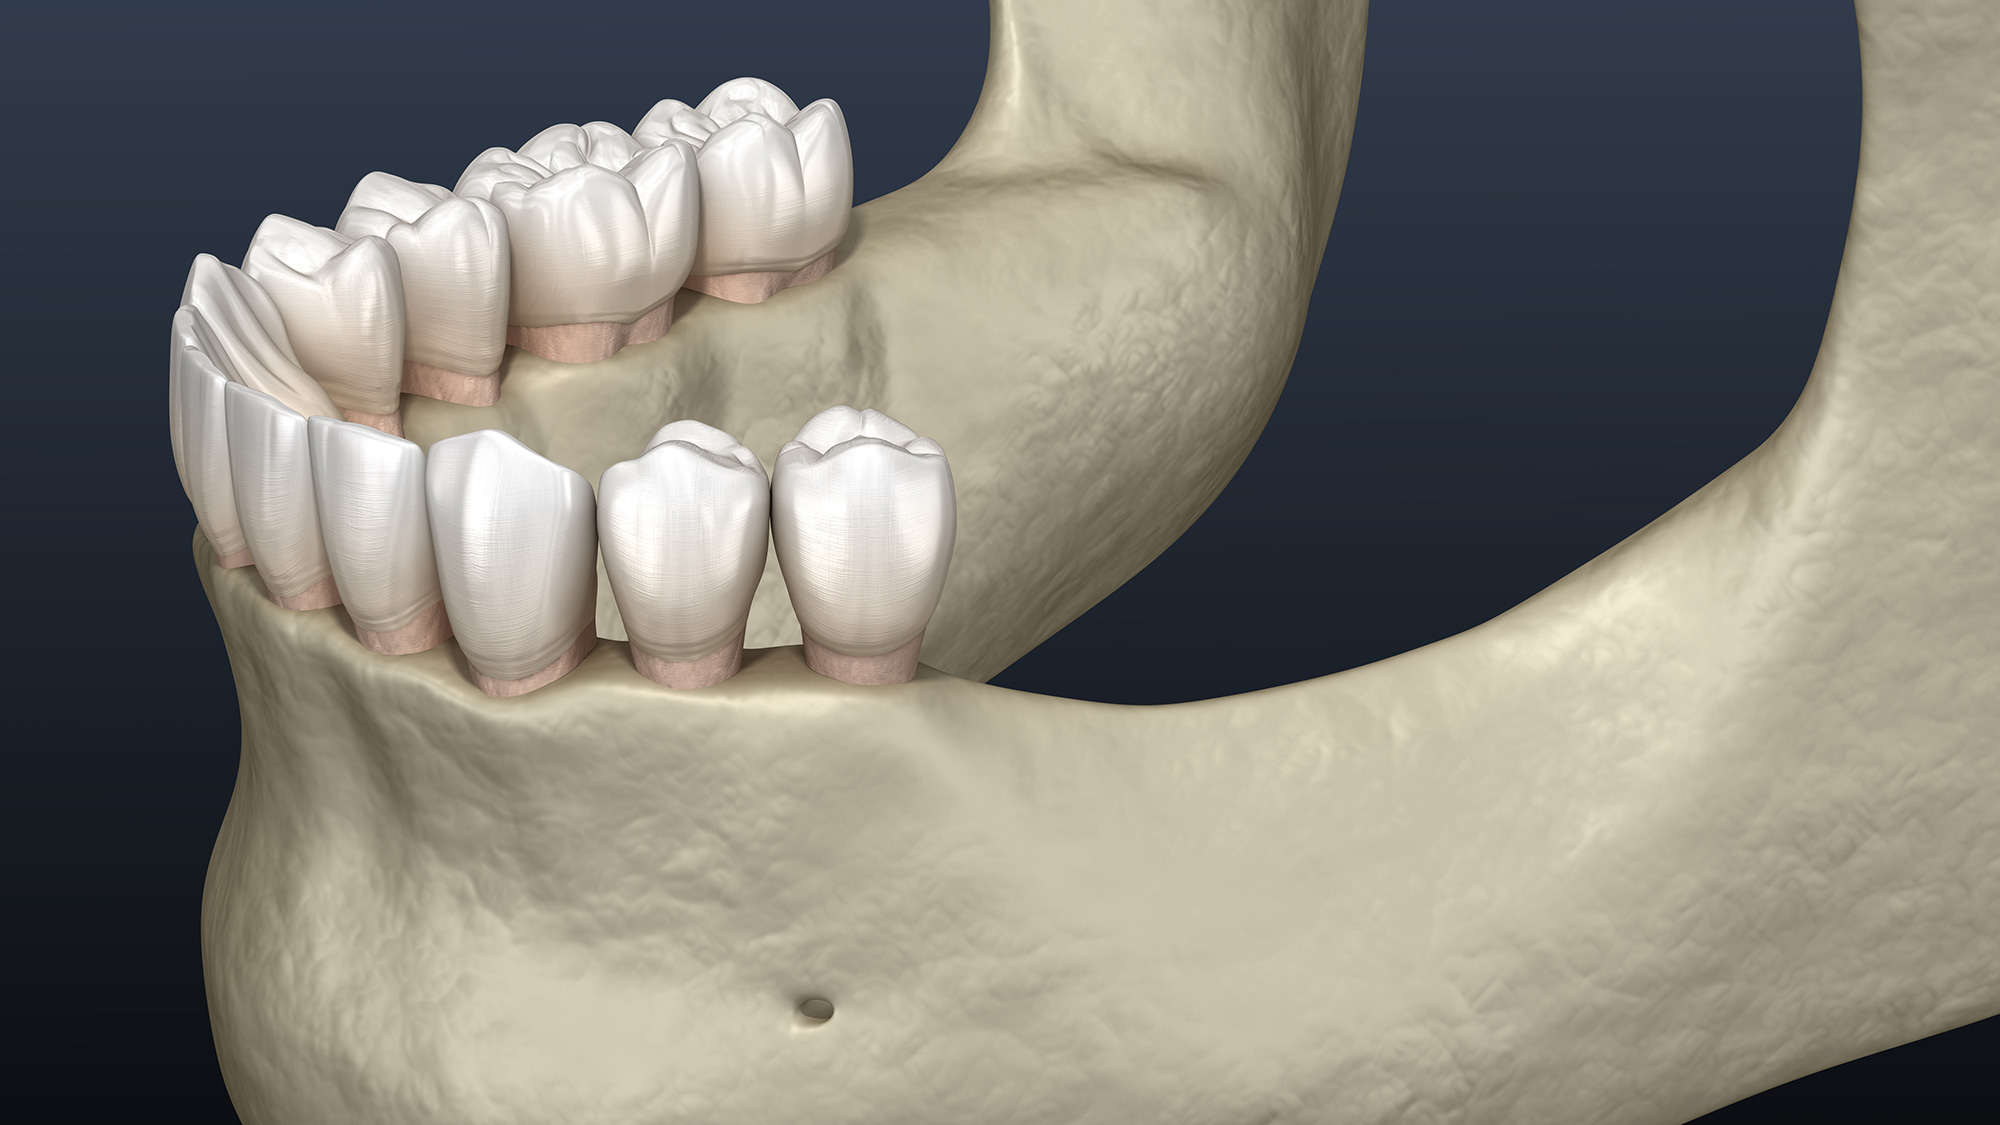 Tooth and Bone Loss Pensacola Periodontics and Implant Dentistry Pensacola, FL